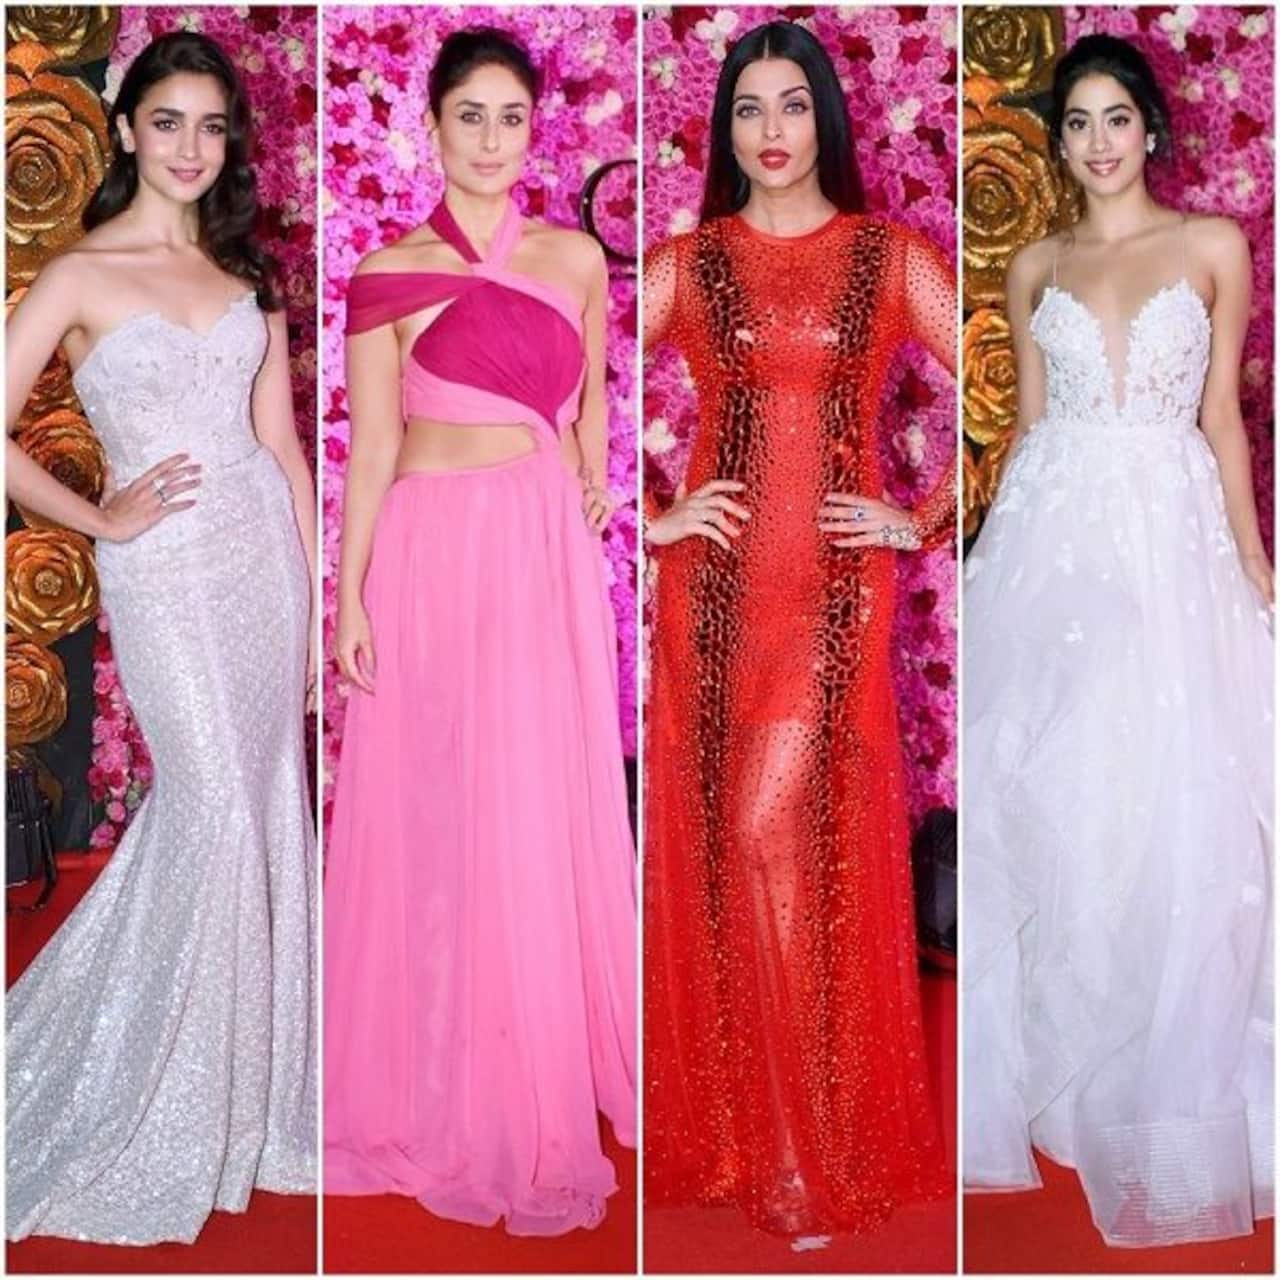 Kareena Kapoor Khan, Alia Bhatt, Janhvi Kapoor, Aishwarya Rai Bachchan: Lux Golden Rose Awards 2018 was a starry affair with the who's who of B-Town in attendance